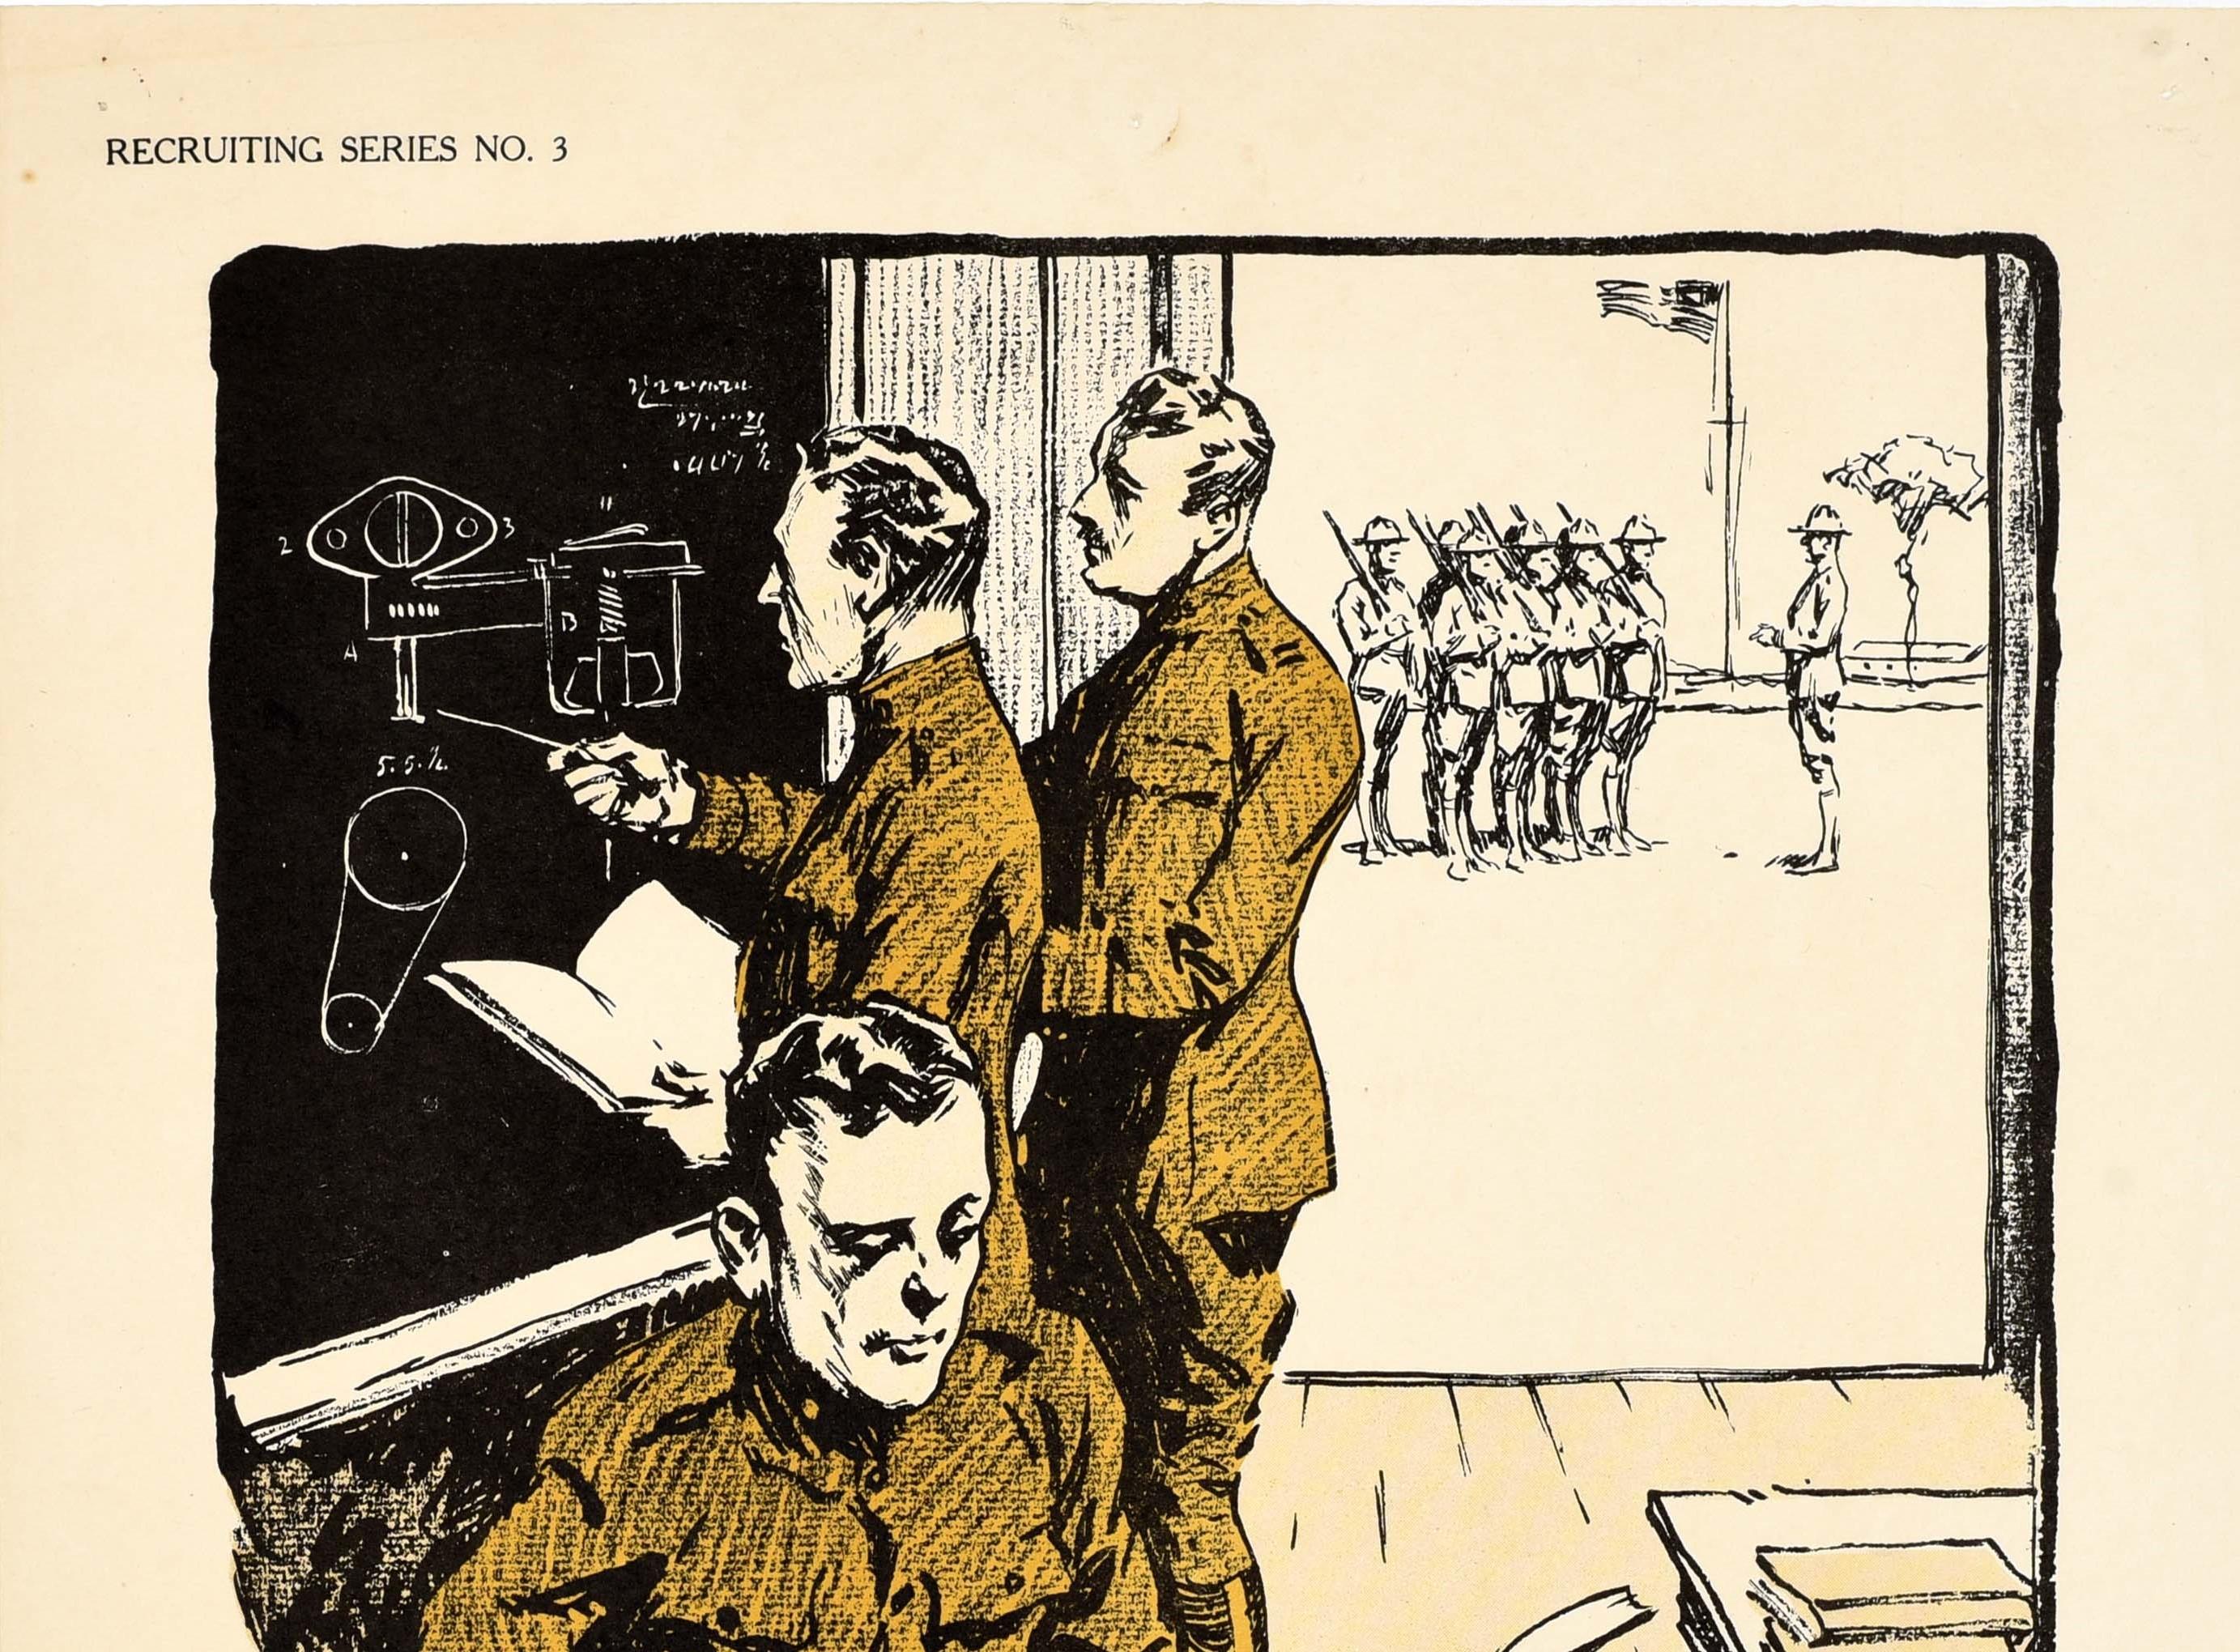 Original antique World War One military recruitment poster - The U.S. Army wants real men Join the University in Khaki and fit yourself for higher rank in civil life or a commission in the army You earn while you learn - featuring a great design